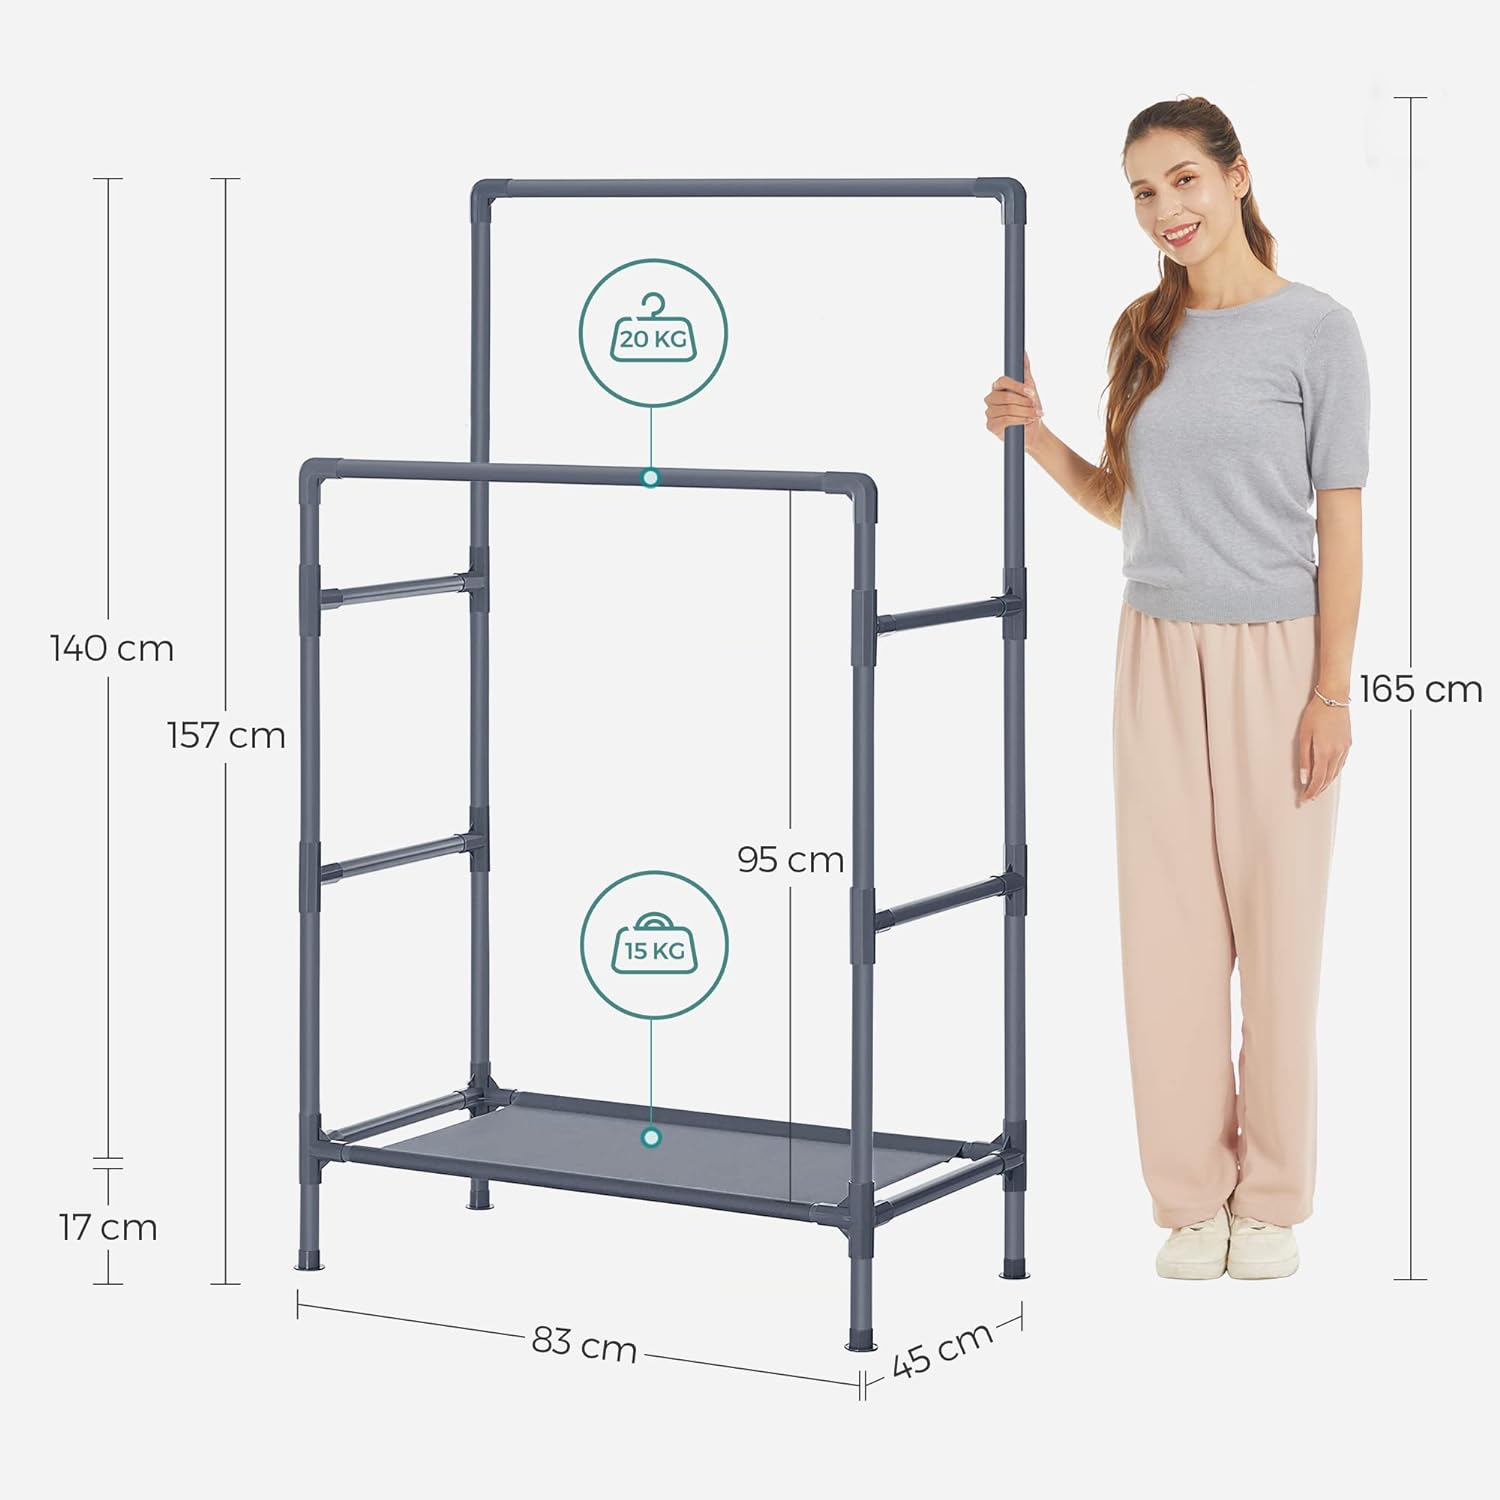 SONGMICS Metal Clothes Rack with 2 Rails Grey